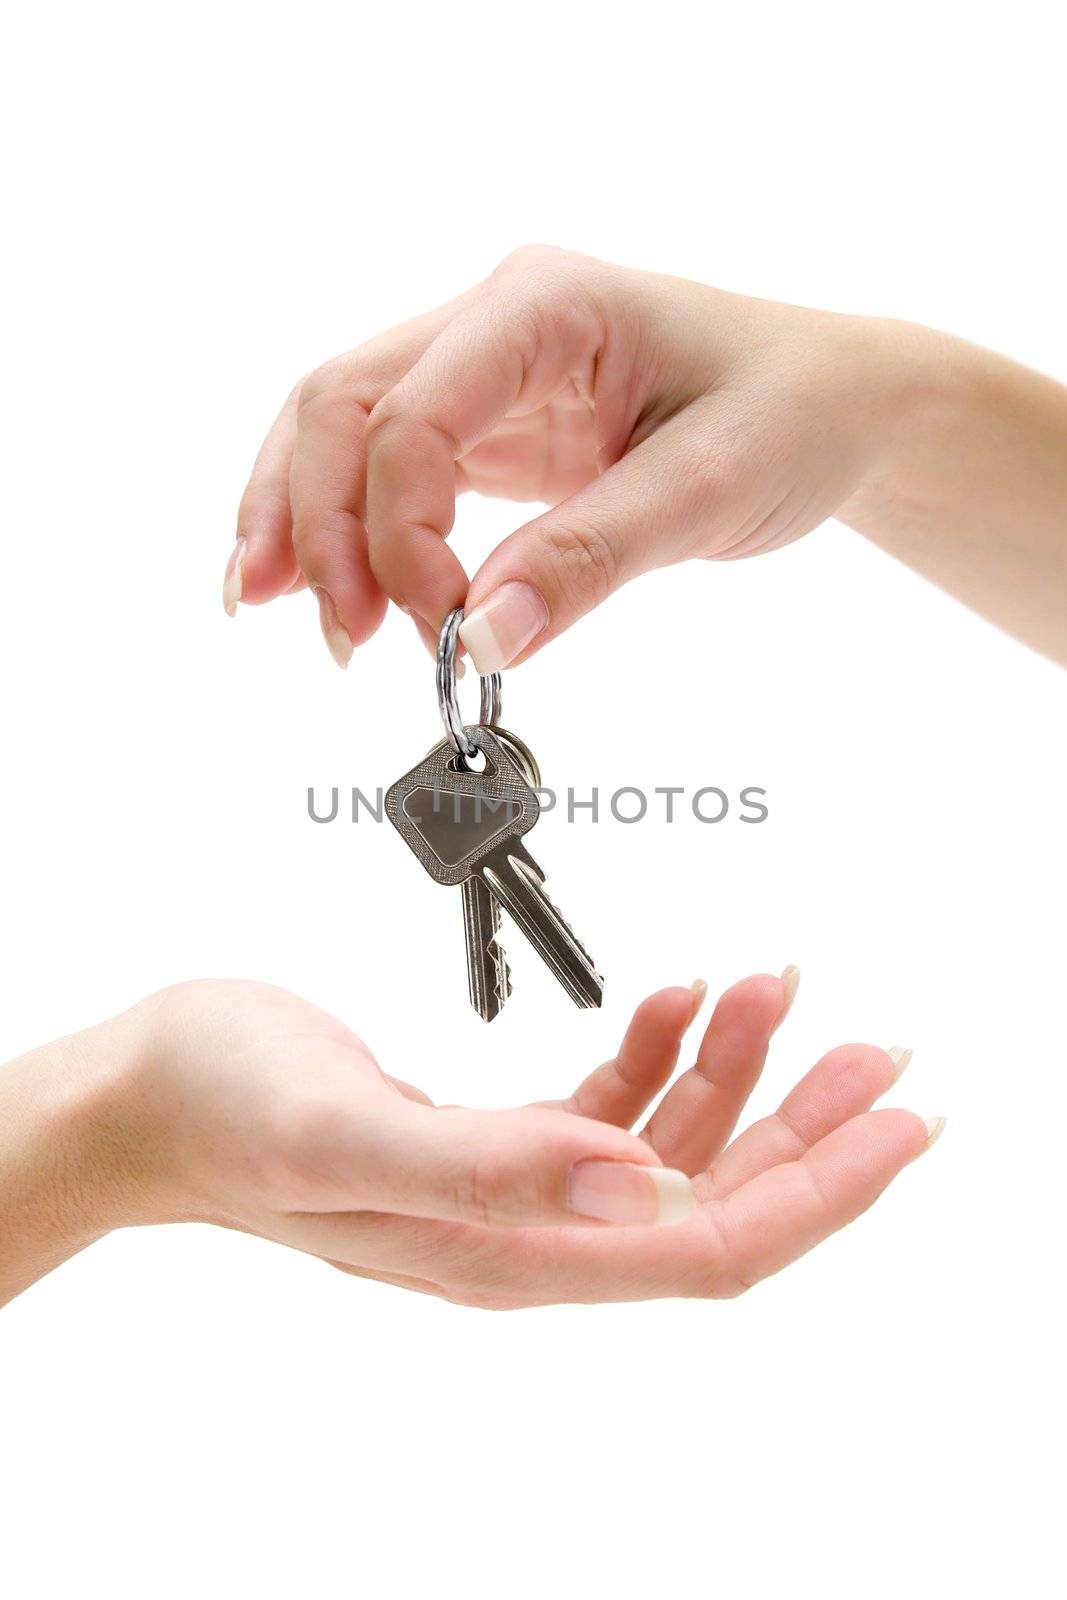 Receiving a bunch of keys. Isolated on a white background.